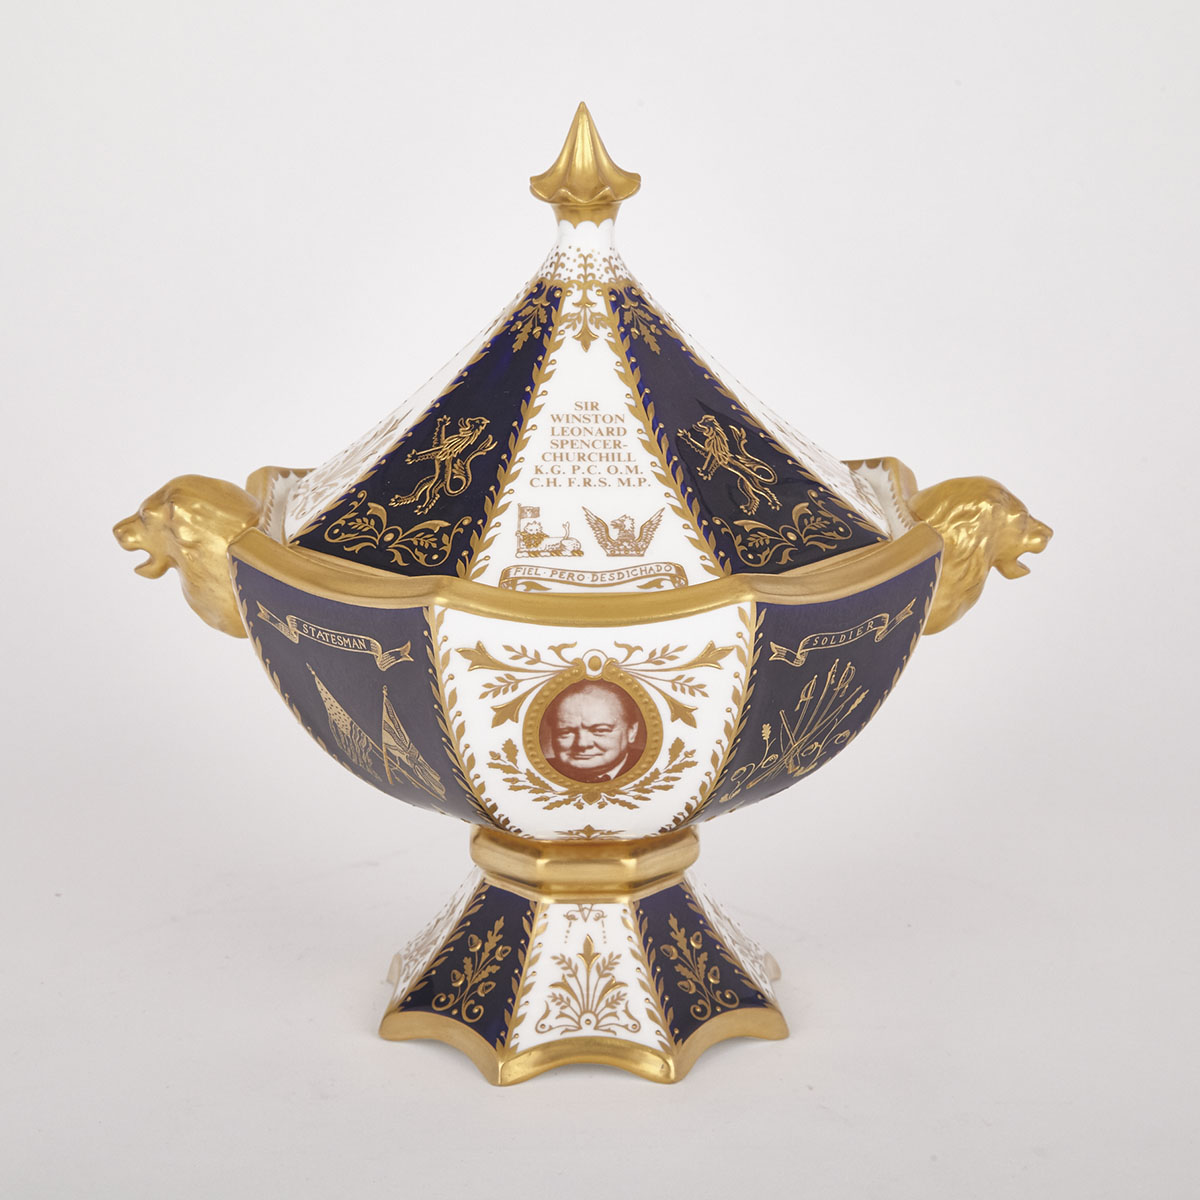 Abbeydale Sir Winston Churchill Commemorative Octagonal Bowl and Cover, 86/250 for Thomas Goode, 20th century